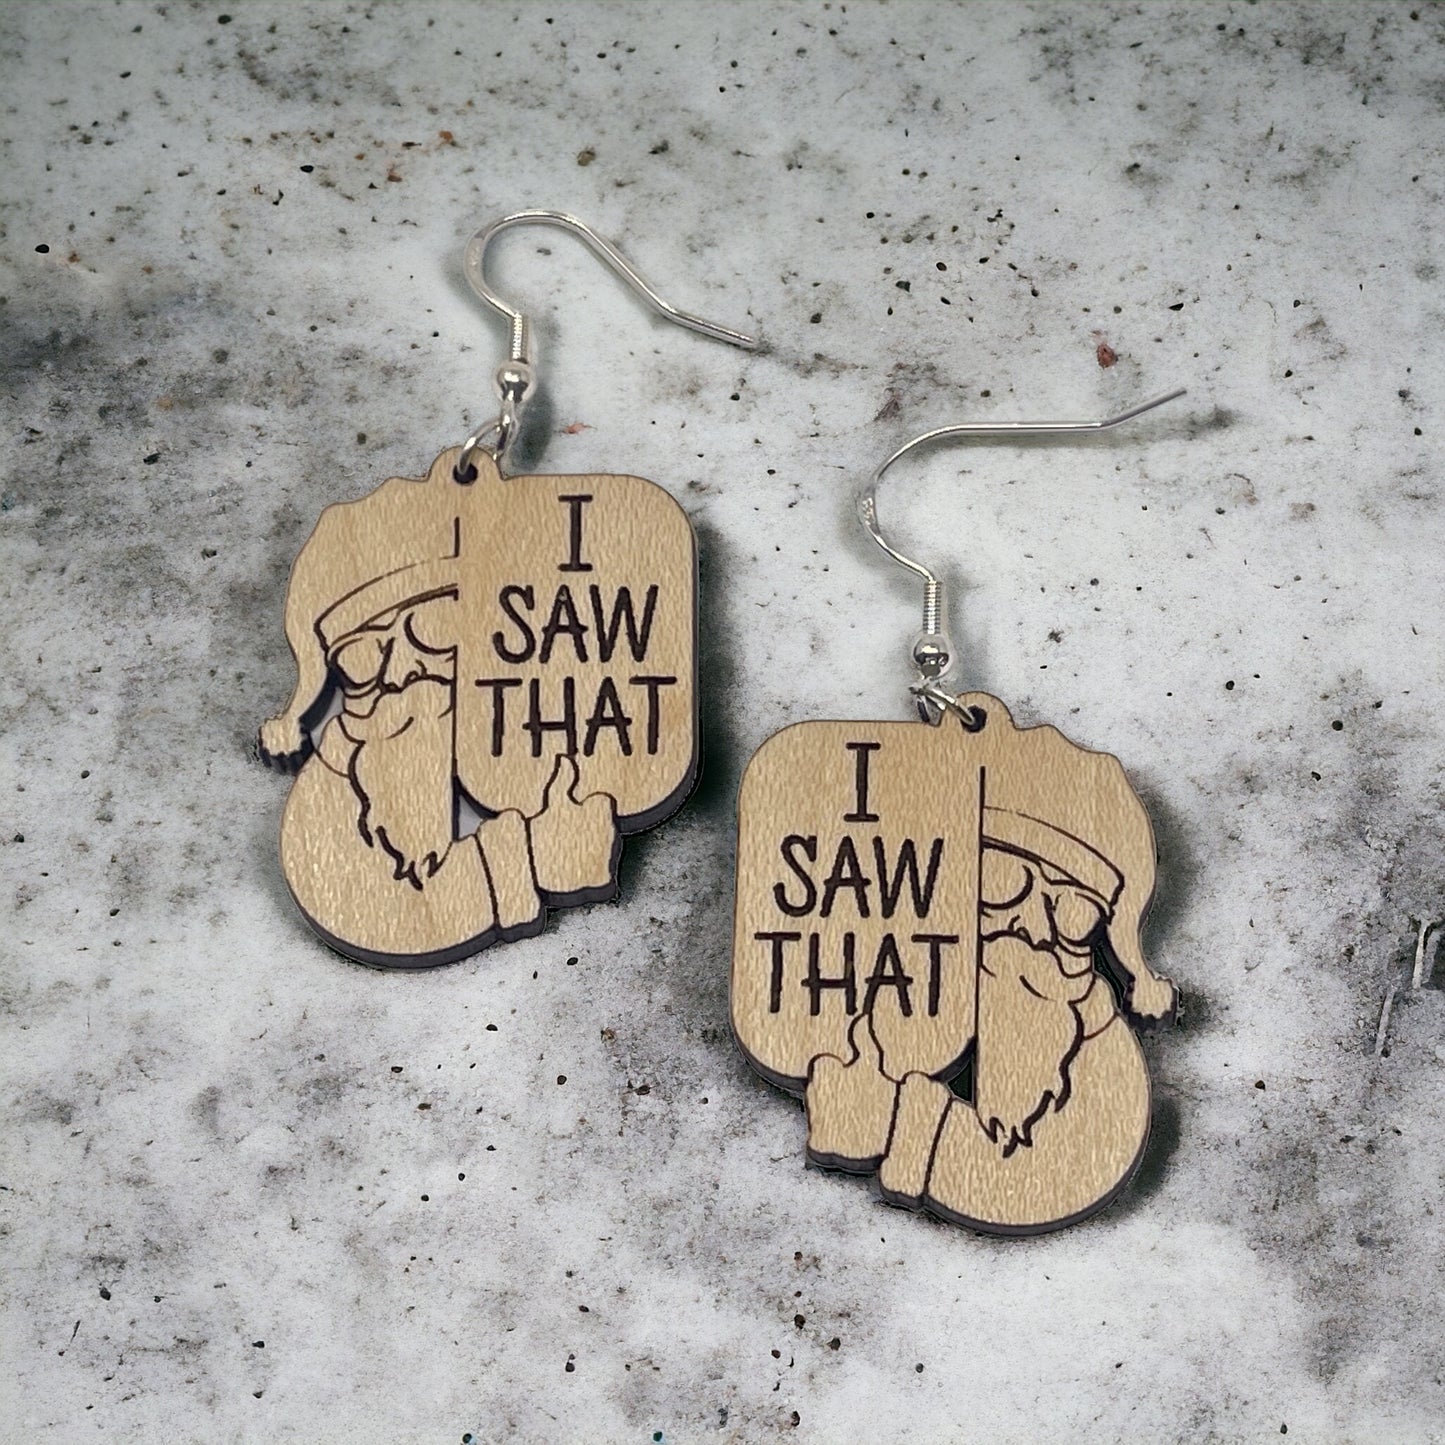 Funny Santa Earrings, Rustic Dangle Earring, Funny Quotes Earring, Cute Winter Holiday Earring, Wooden Word Earring, Country Western Jewelry